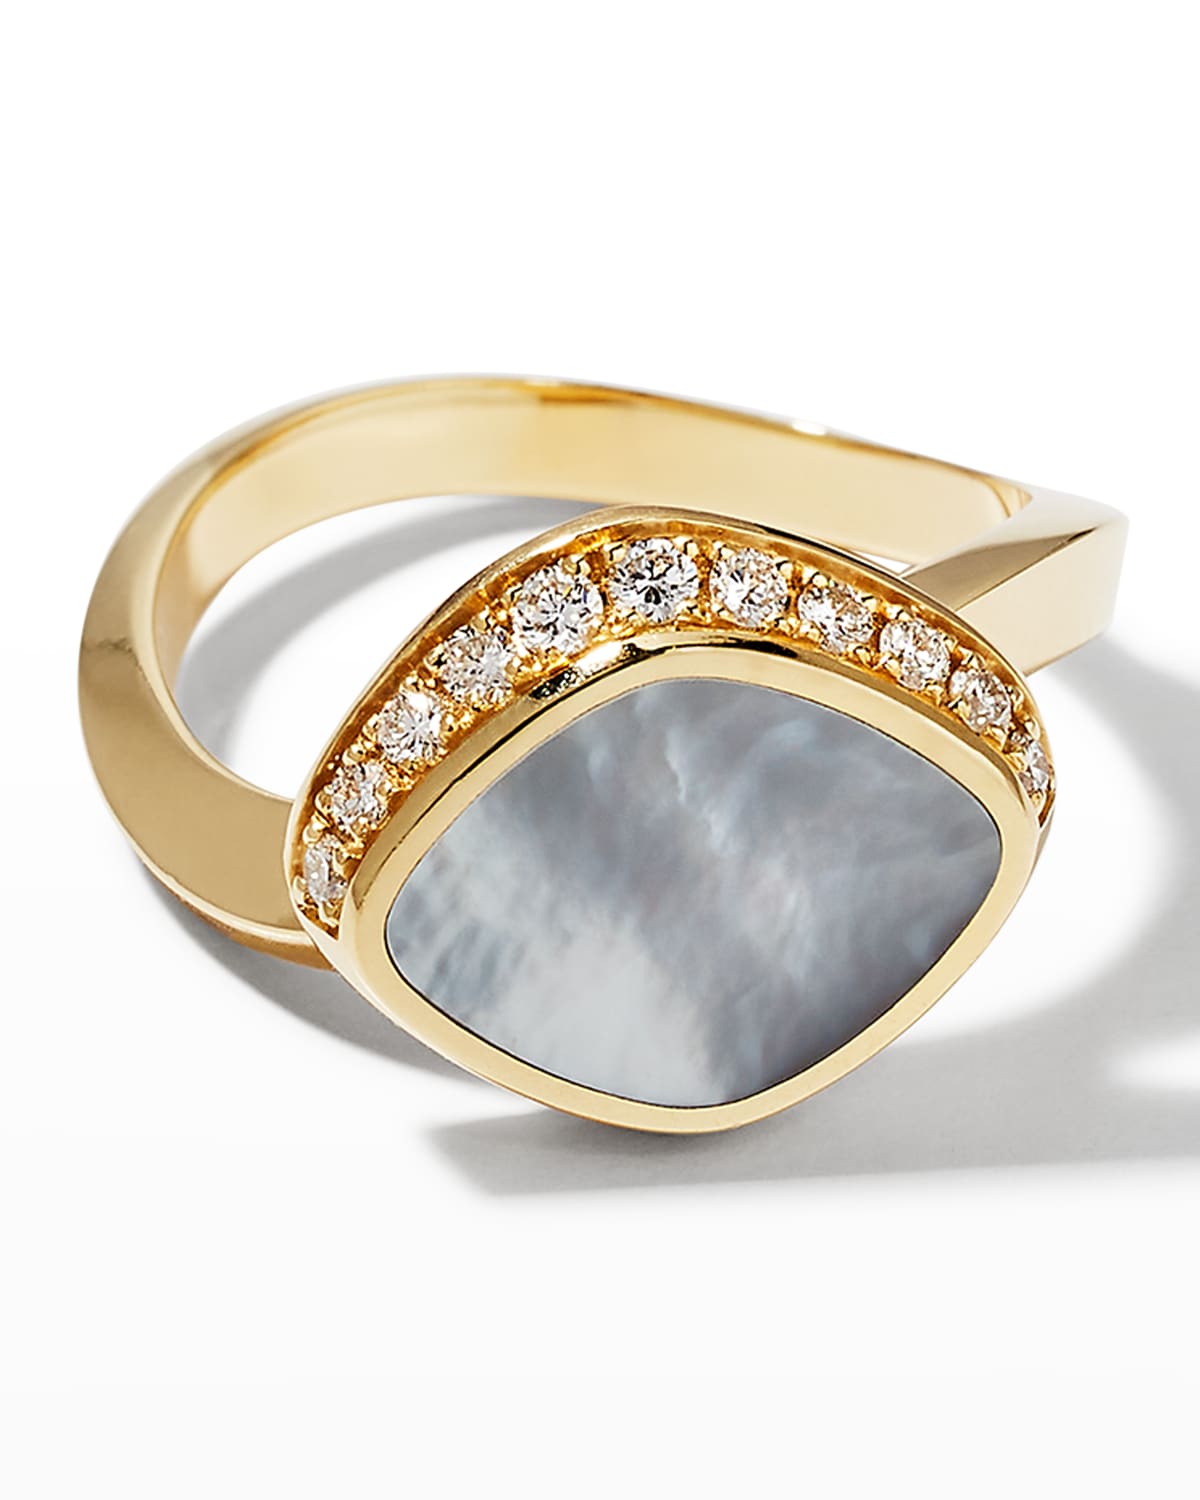 Vendorafa Yellow Gold Pebble Ring With Mother-of-pearl And Diamonds